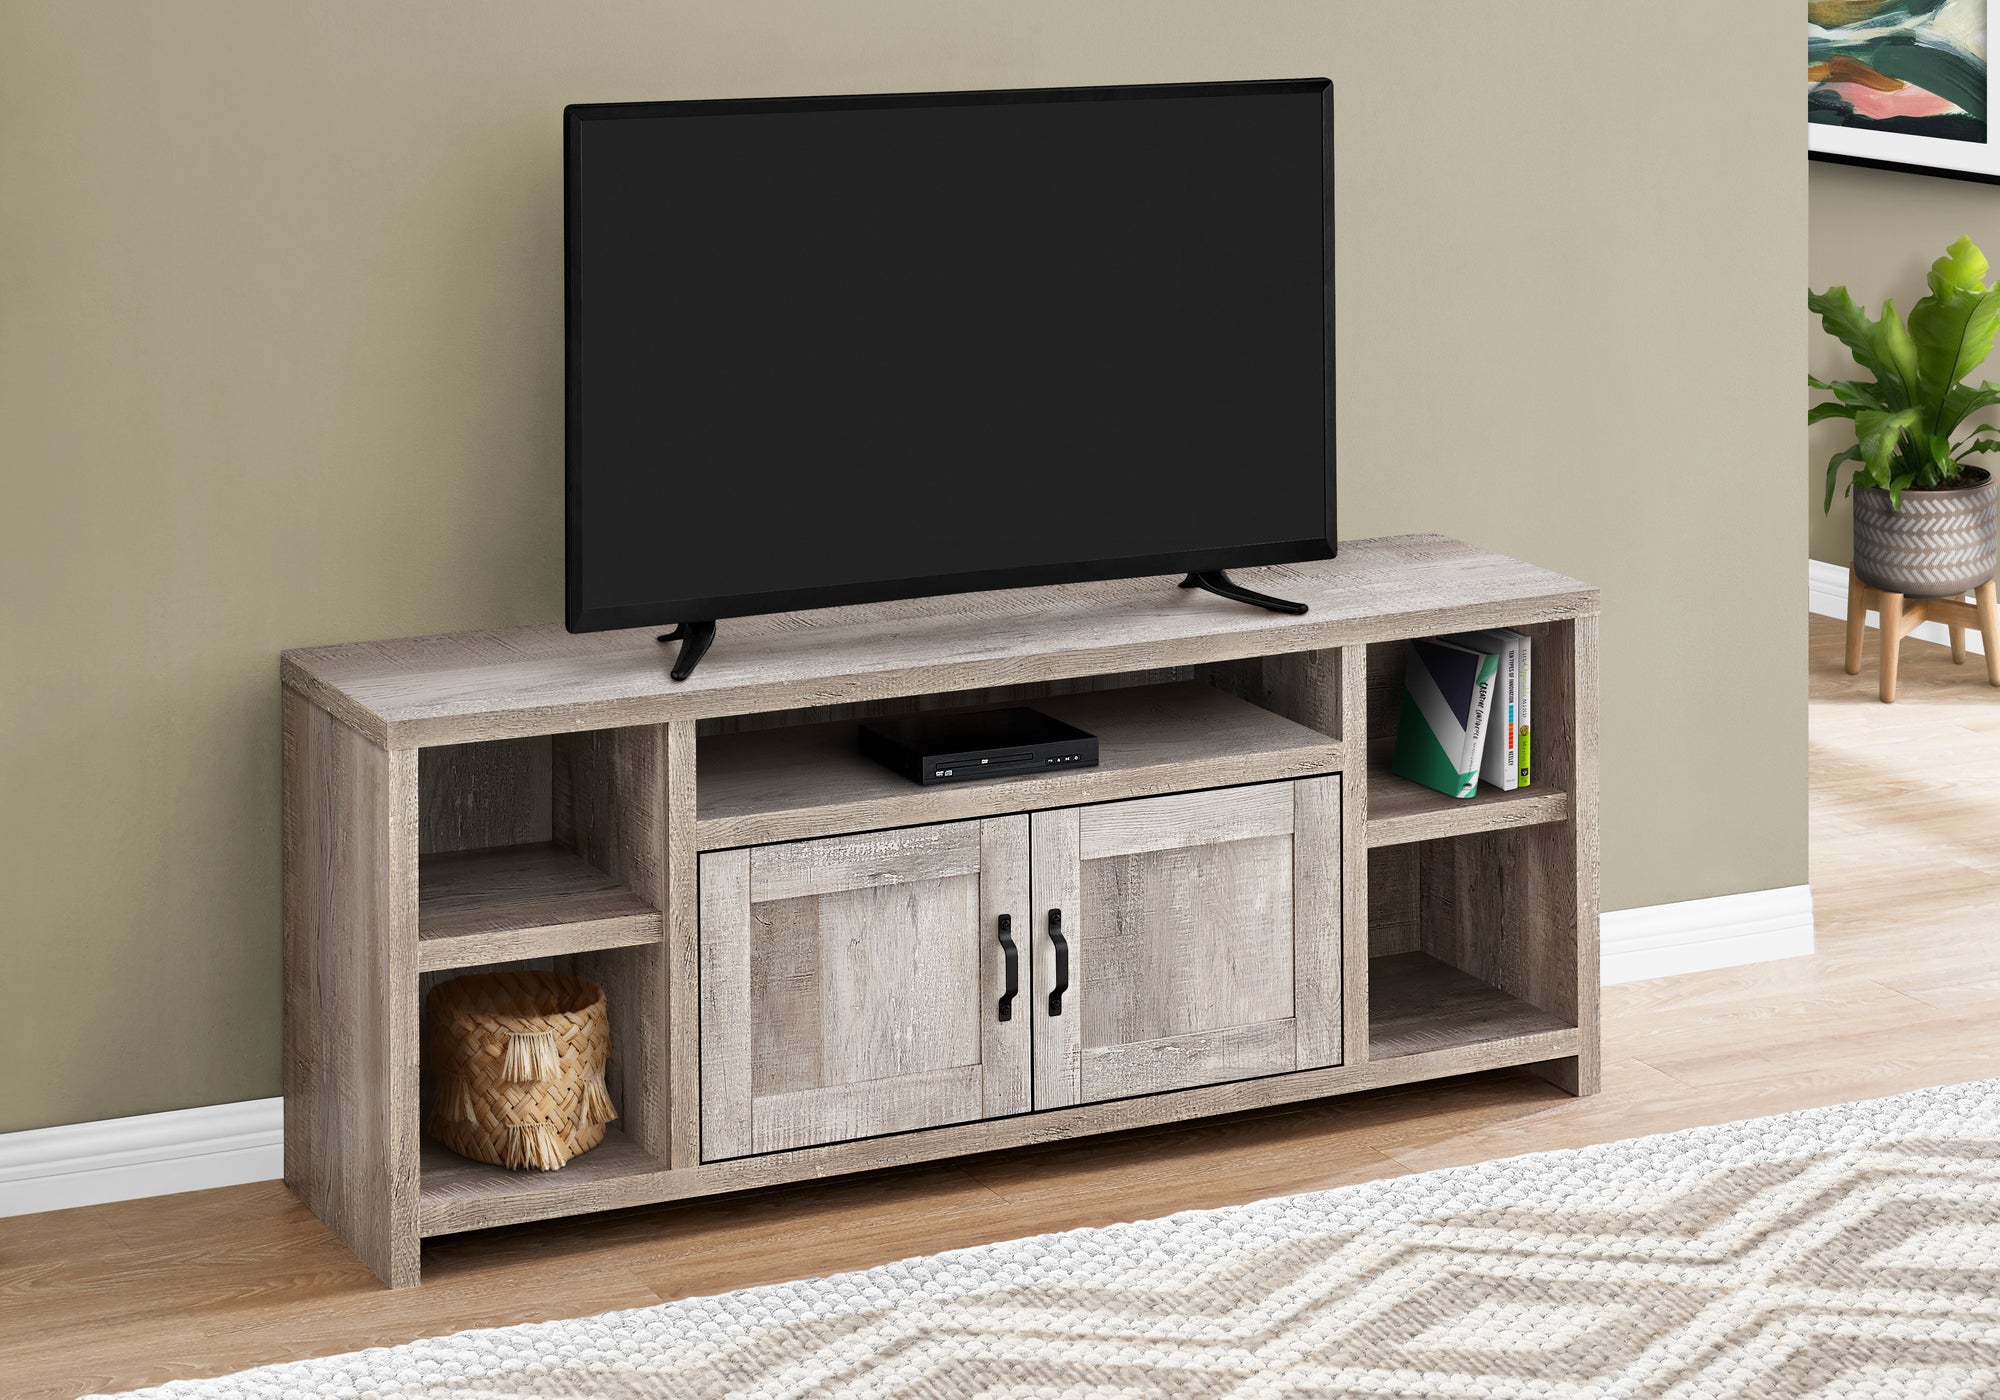 I 2742 - TV STAND - 60"L / TAUPE RECLAIMED WOOD-LOOK BY MONARCH SPECIALTIES INC